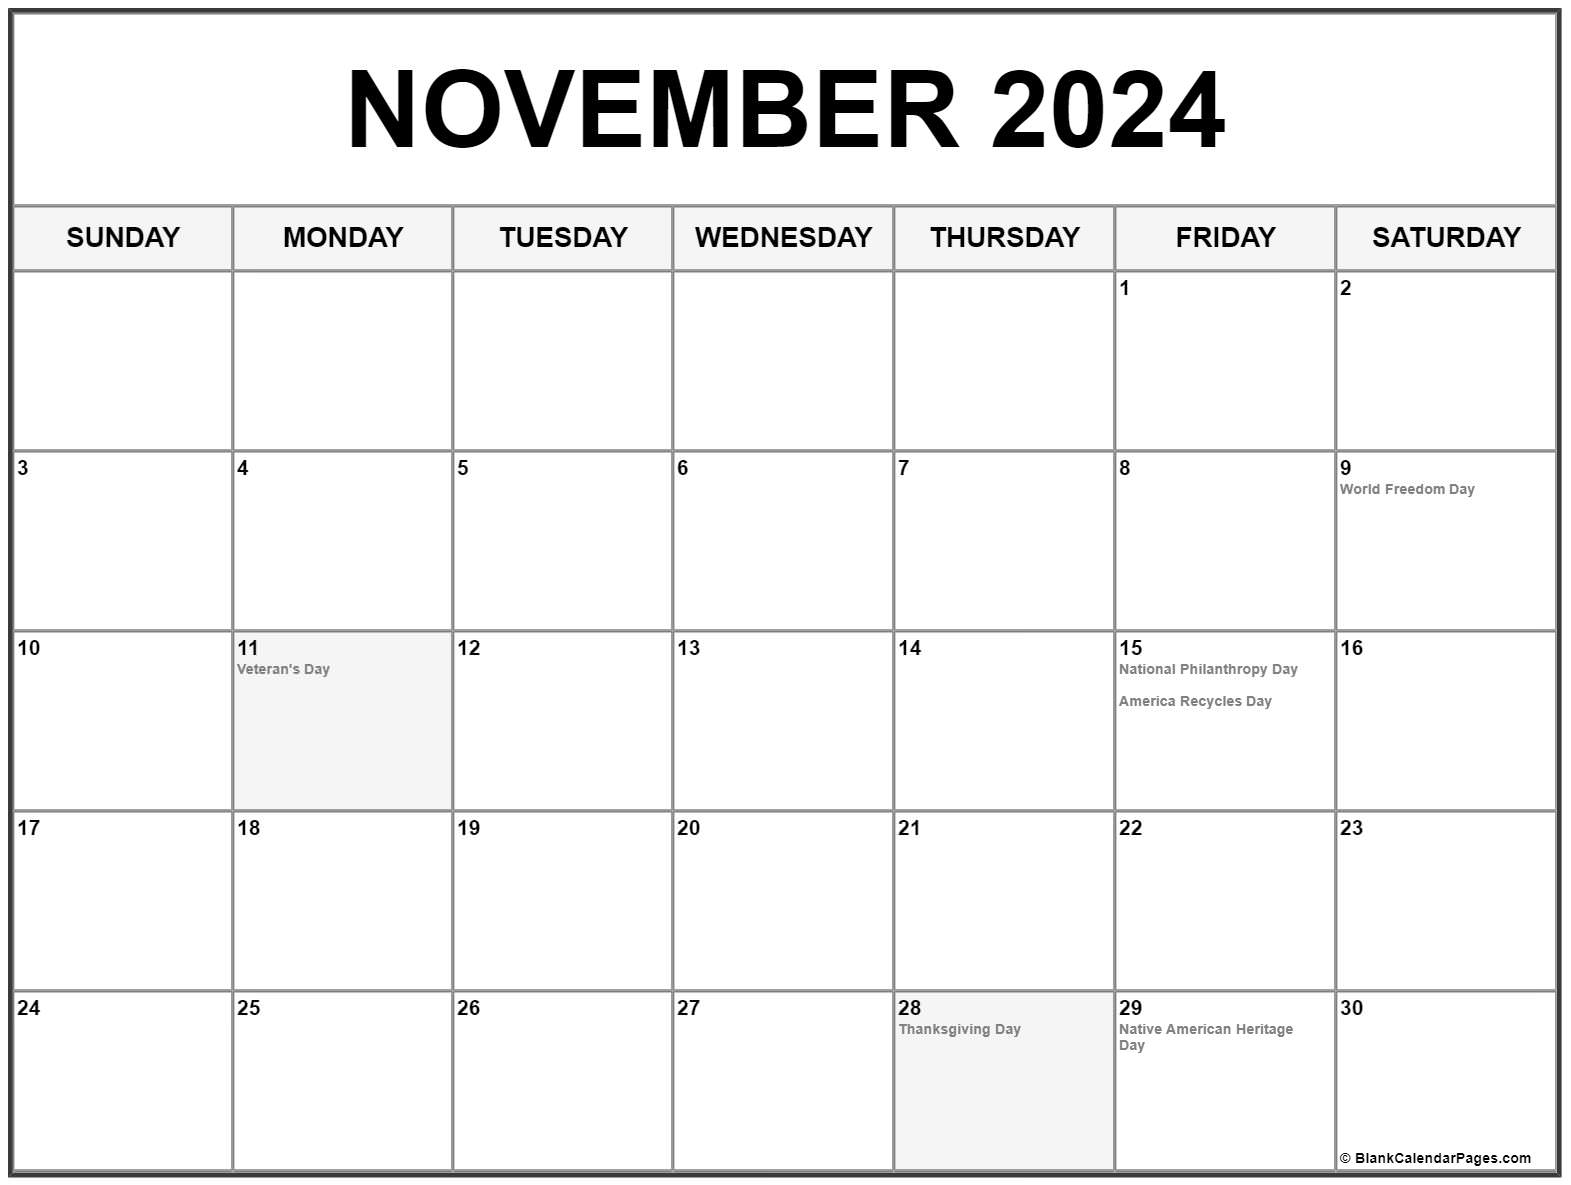 Collection Of November 2021 Calendars With Holidays